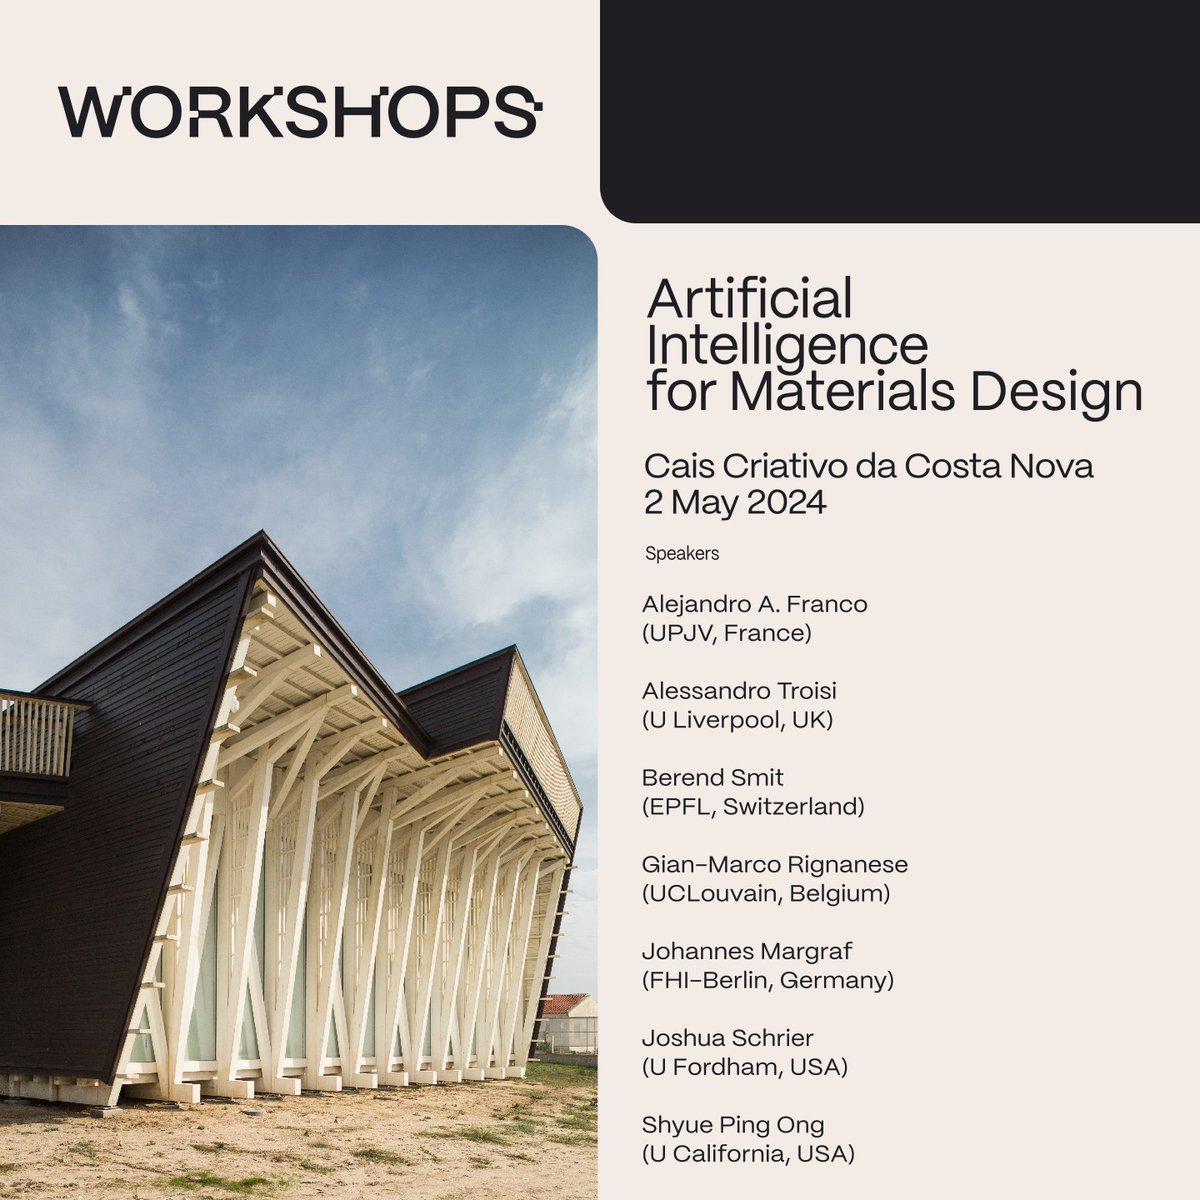 CICECO is organizing a free workshop about Artificial Intelligence for Materials! The registration process is mandatory for attendance. More: ciceco.ua.pt/?tabela=geral_… #ciceco #workshop #artificialintelligence #materials